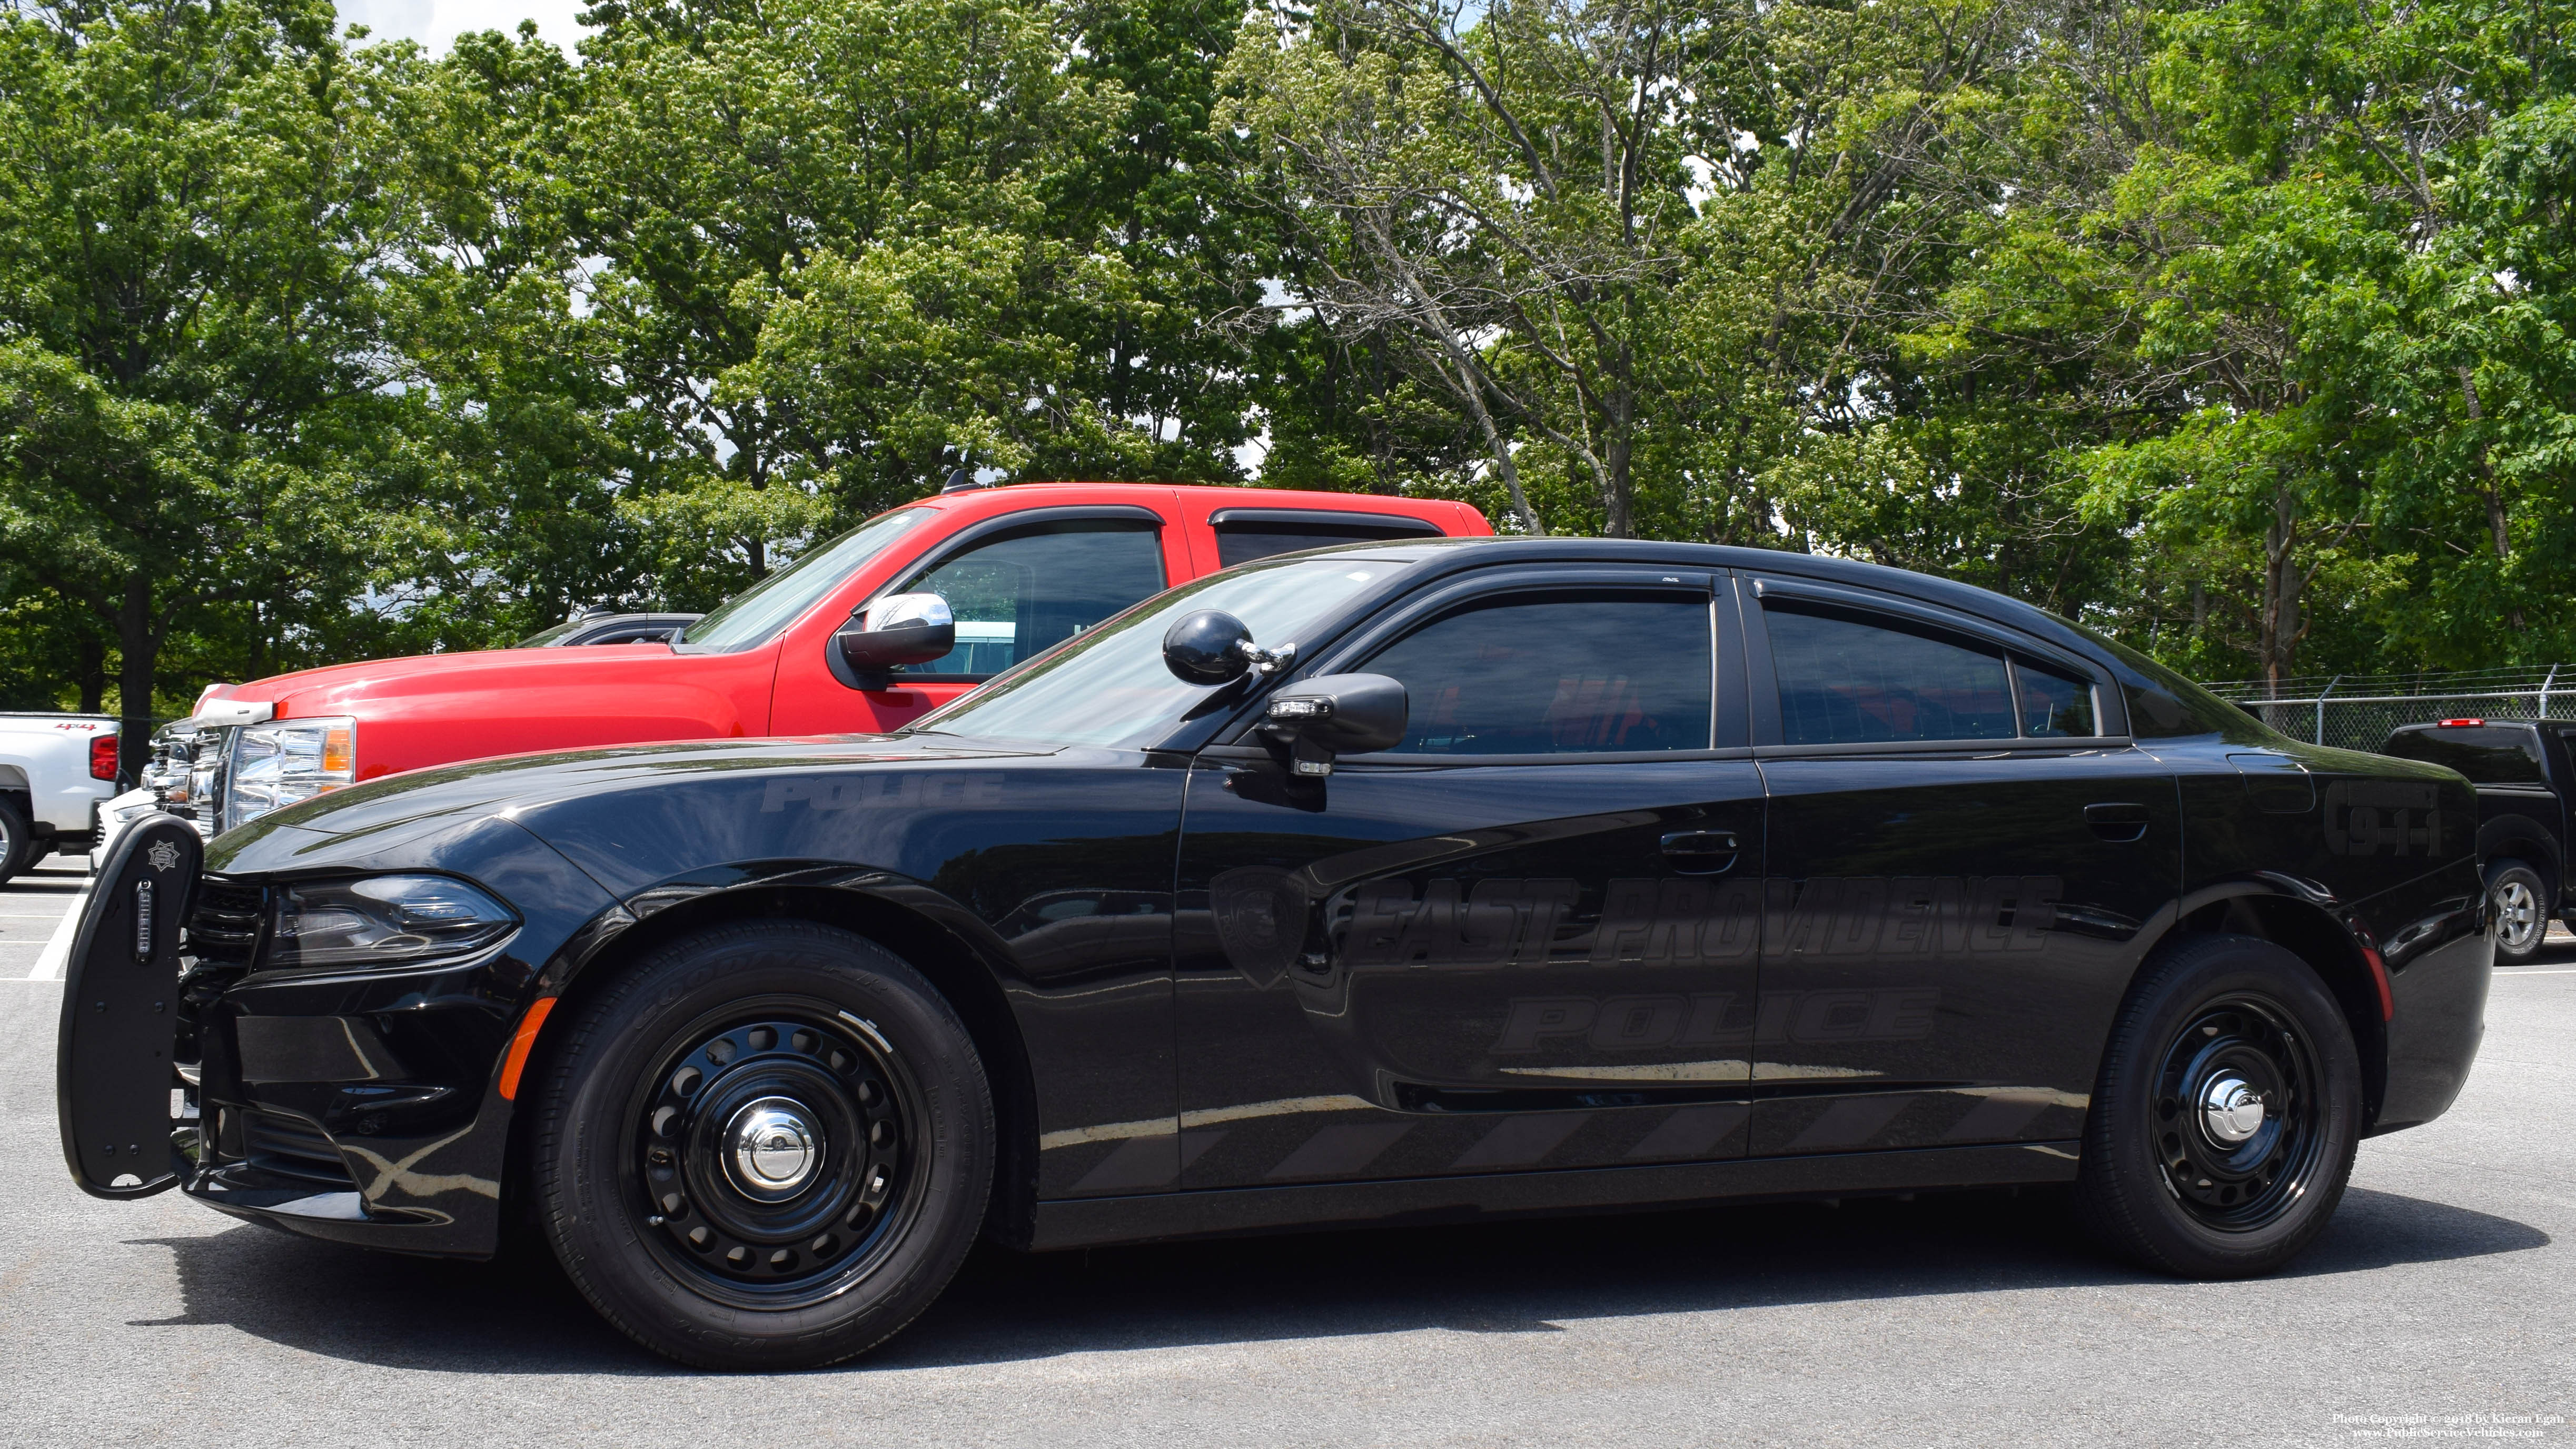 A photo  of East Providence Police
            Car [2]33, a 2018 Dodge Charger             taken by Kieran Egan